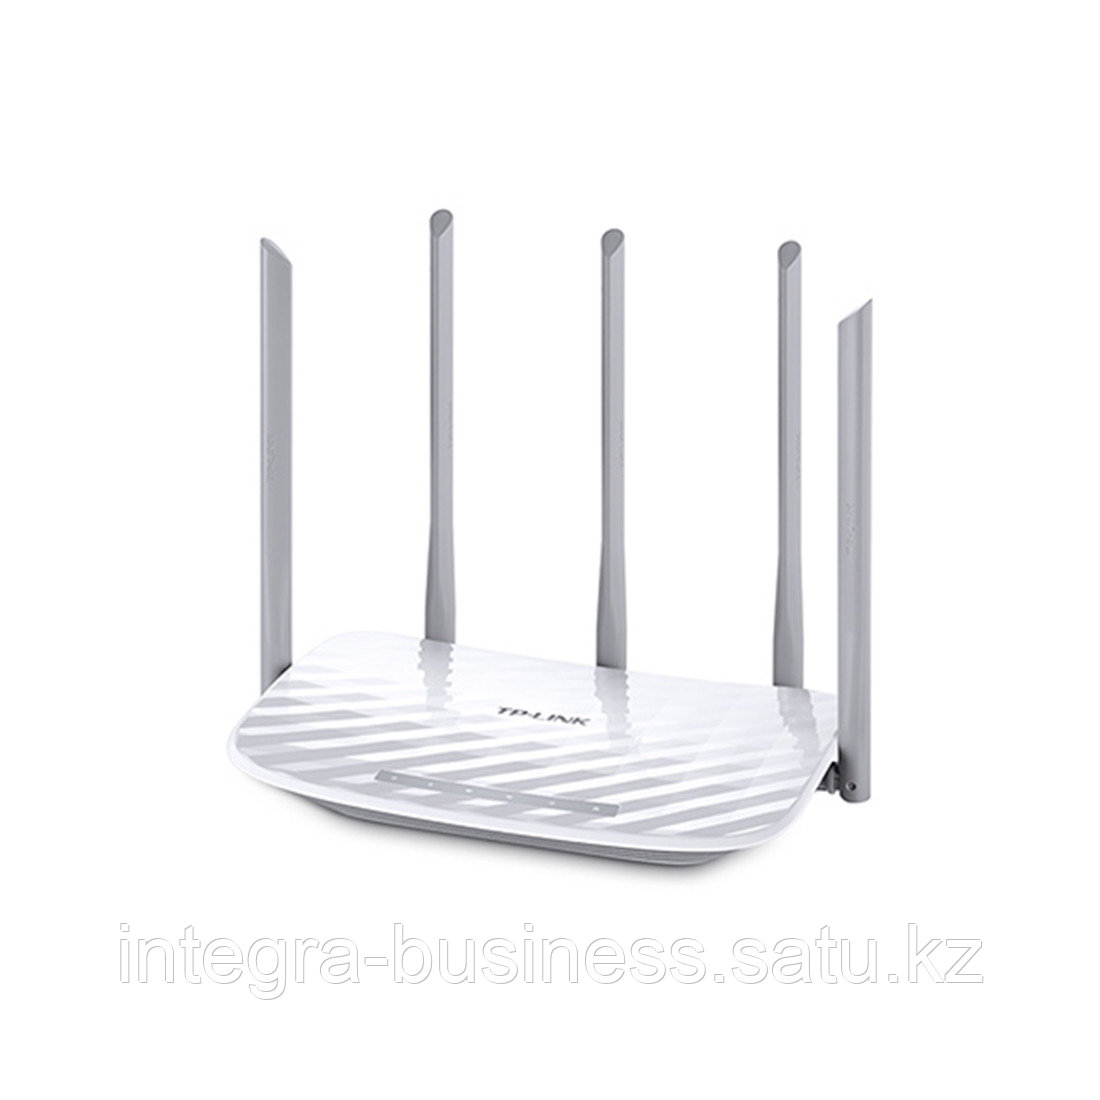 Маршрутизатор TP-Link Archer C60, фото 1